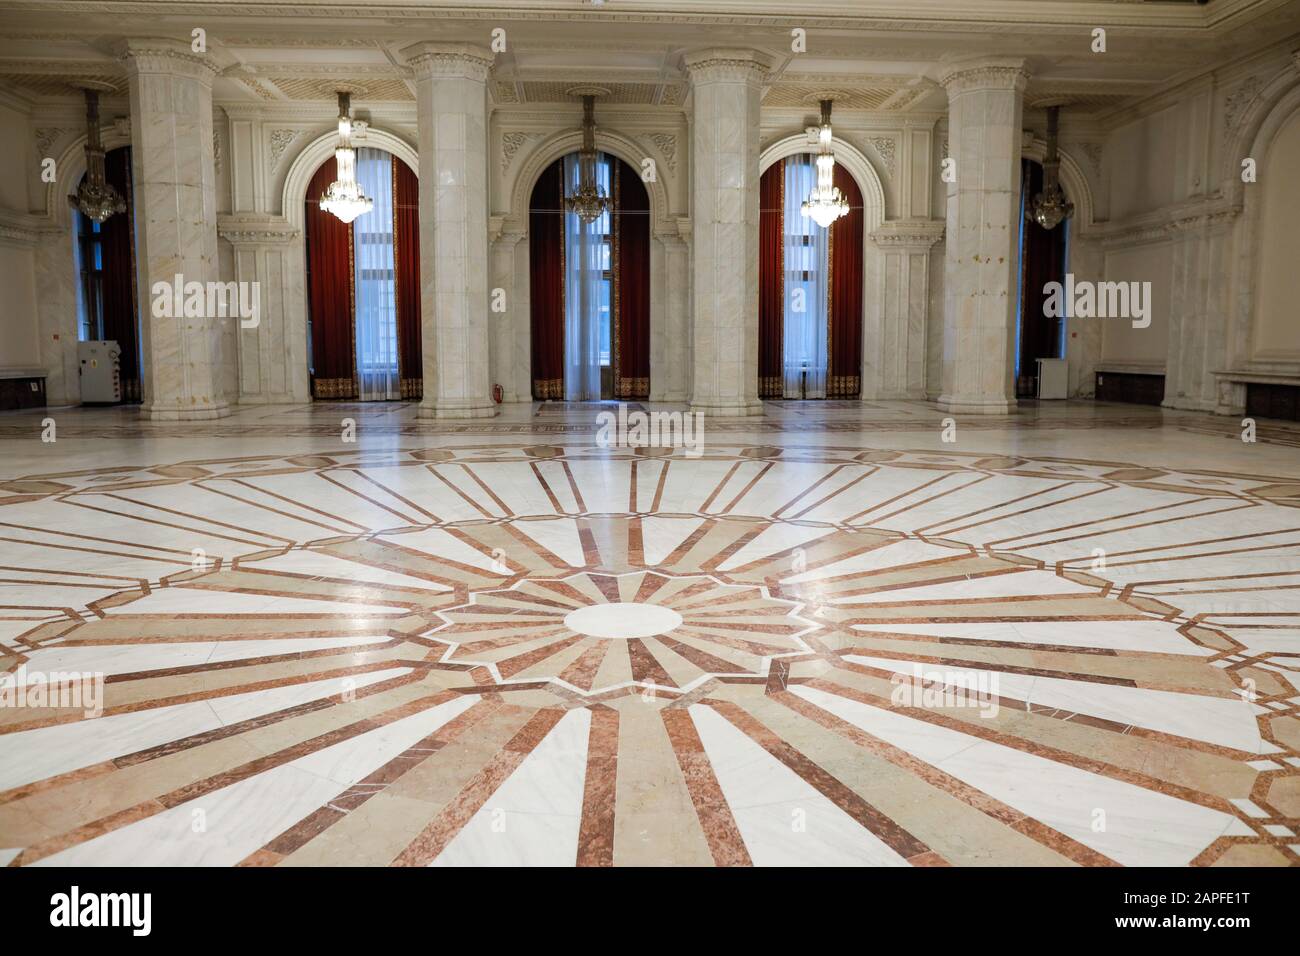 Bucharest, Romania - January 13, 2020: Details from a chamber considered to be the hearth, the physical centre of the Palace of Parliament. Stock Photo